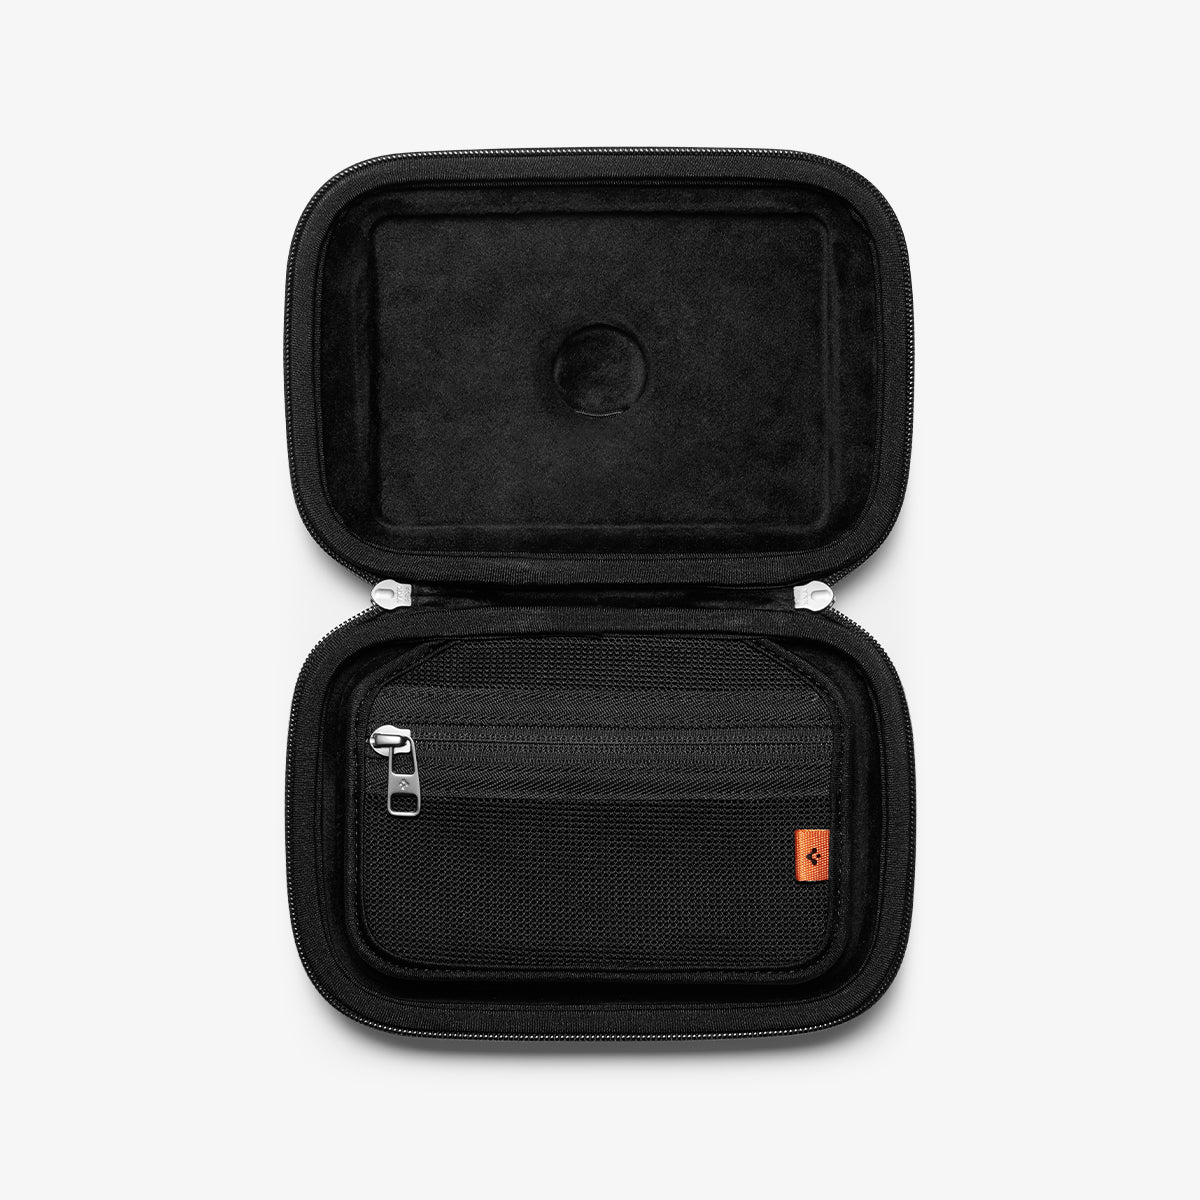 AFA04310 - DJI Action 2 Case Rugged Armor Pro Pouch in black showing the inside with airtag slot and zipper pouch to hold cables without apple logo